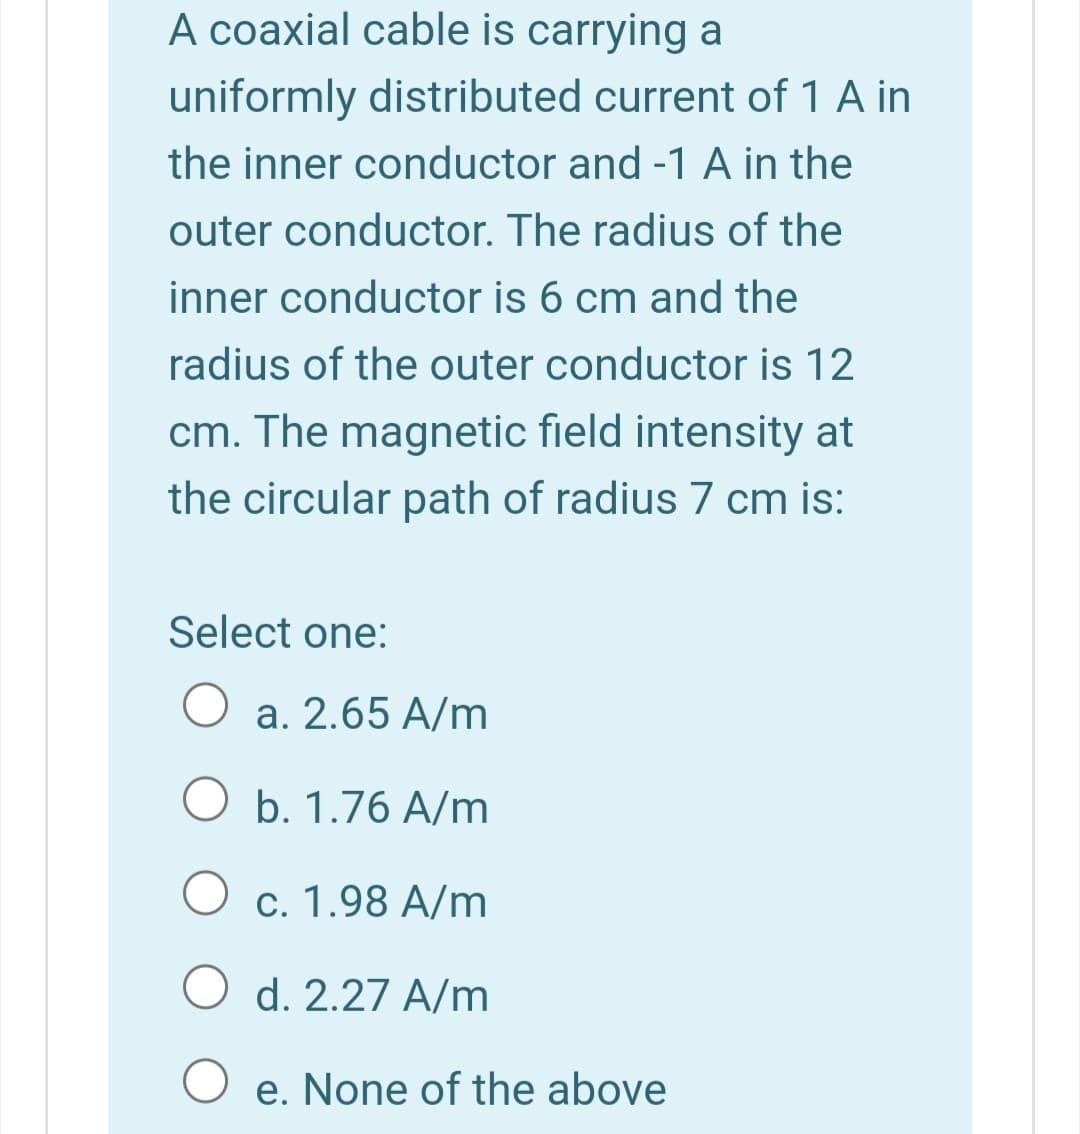 A coaxial cable is carrying a
uniformly distributed current of 1 A in
the inner conductor and -1 A in the
outer conductor. The radius of the
inner conductor is 6 cm and the
radius of the outer conductor is 12
cm. The magnetic field intensity at
the circular path of radius 7 cm is:
Select one:
a. 2.65 A/m
O b. 1.76 A/m
O c. 1.98 A/m
O d. 2.27 A/m
e. None of the above
